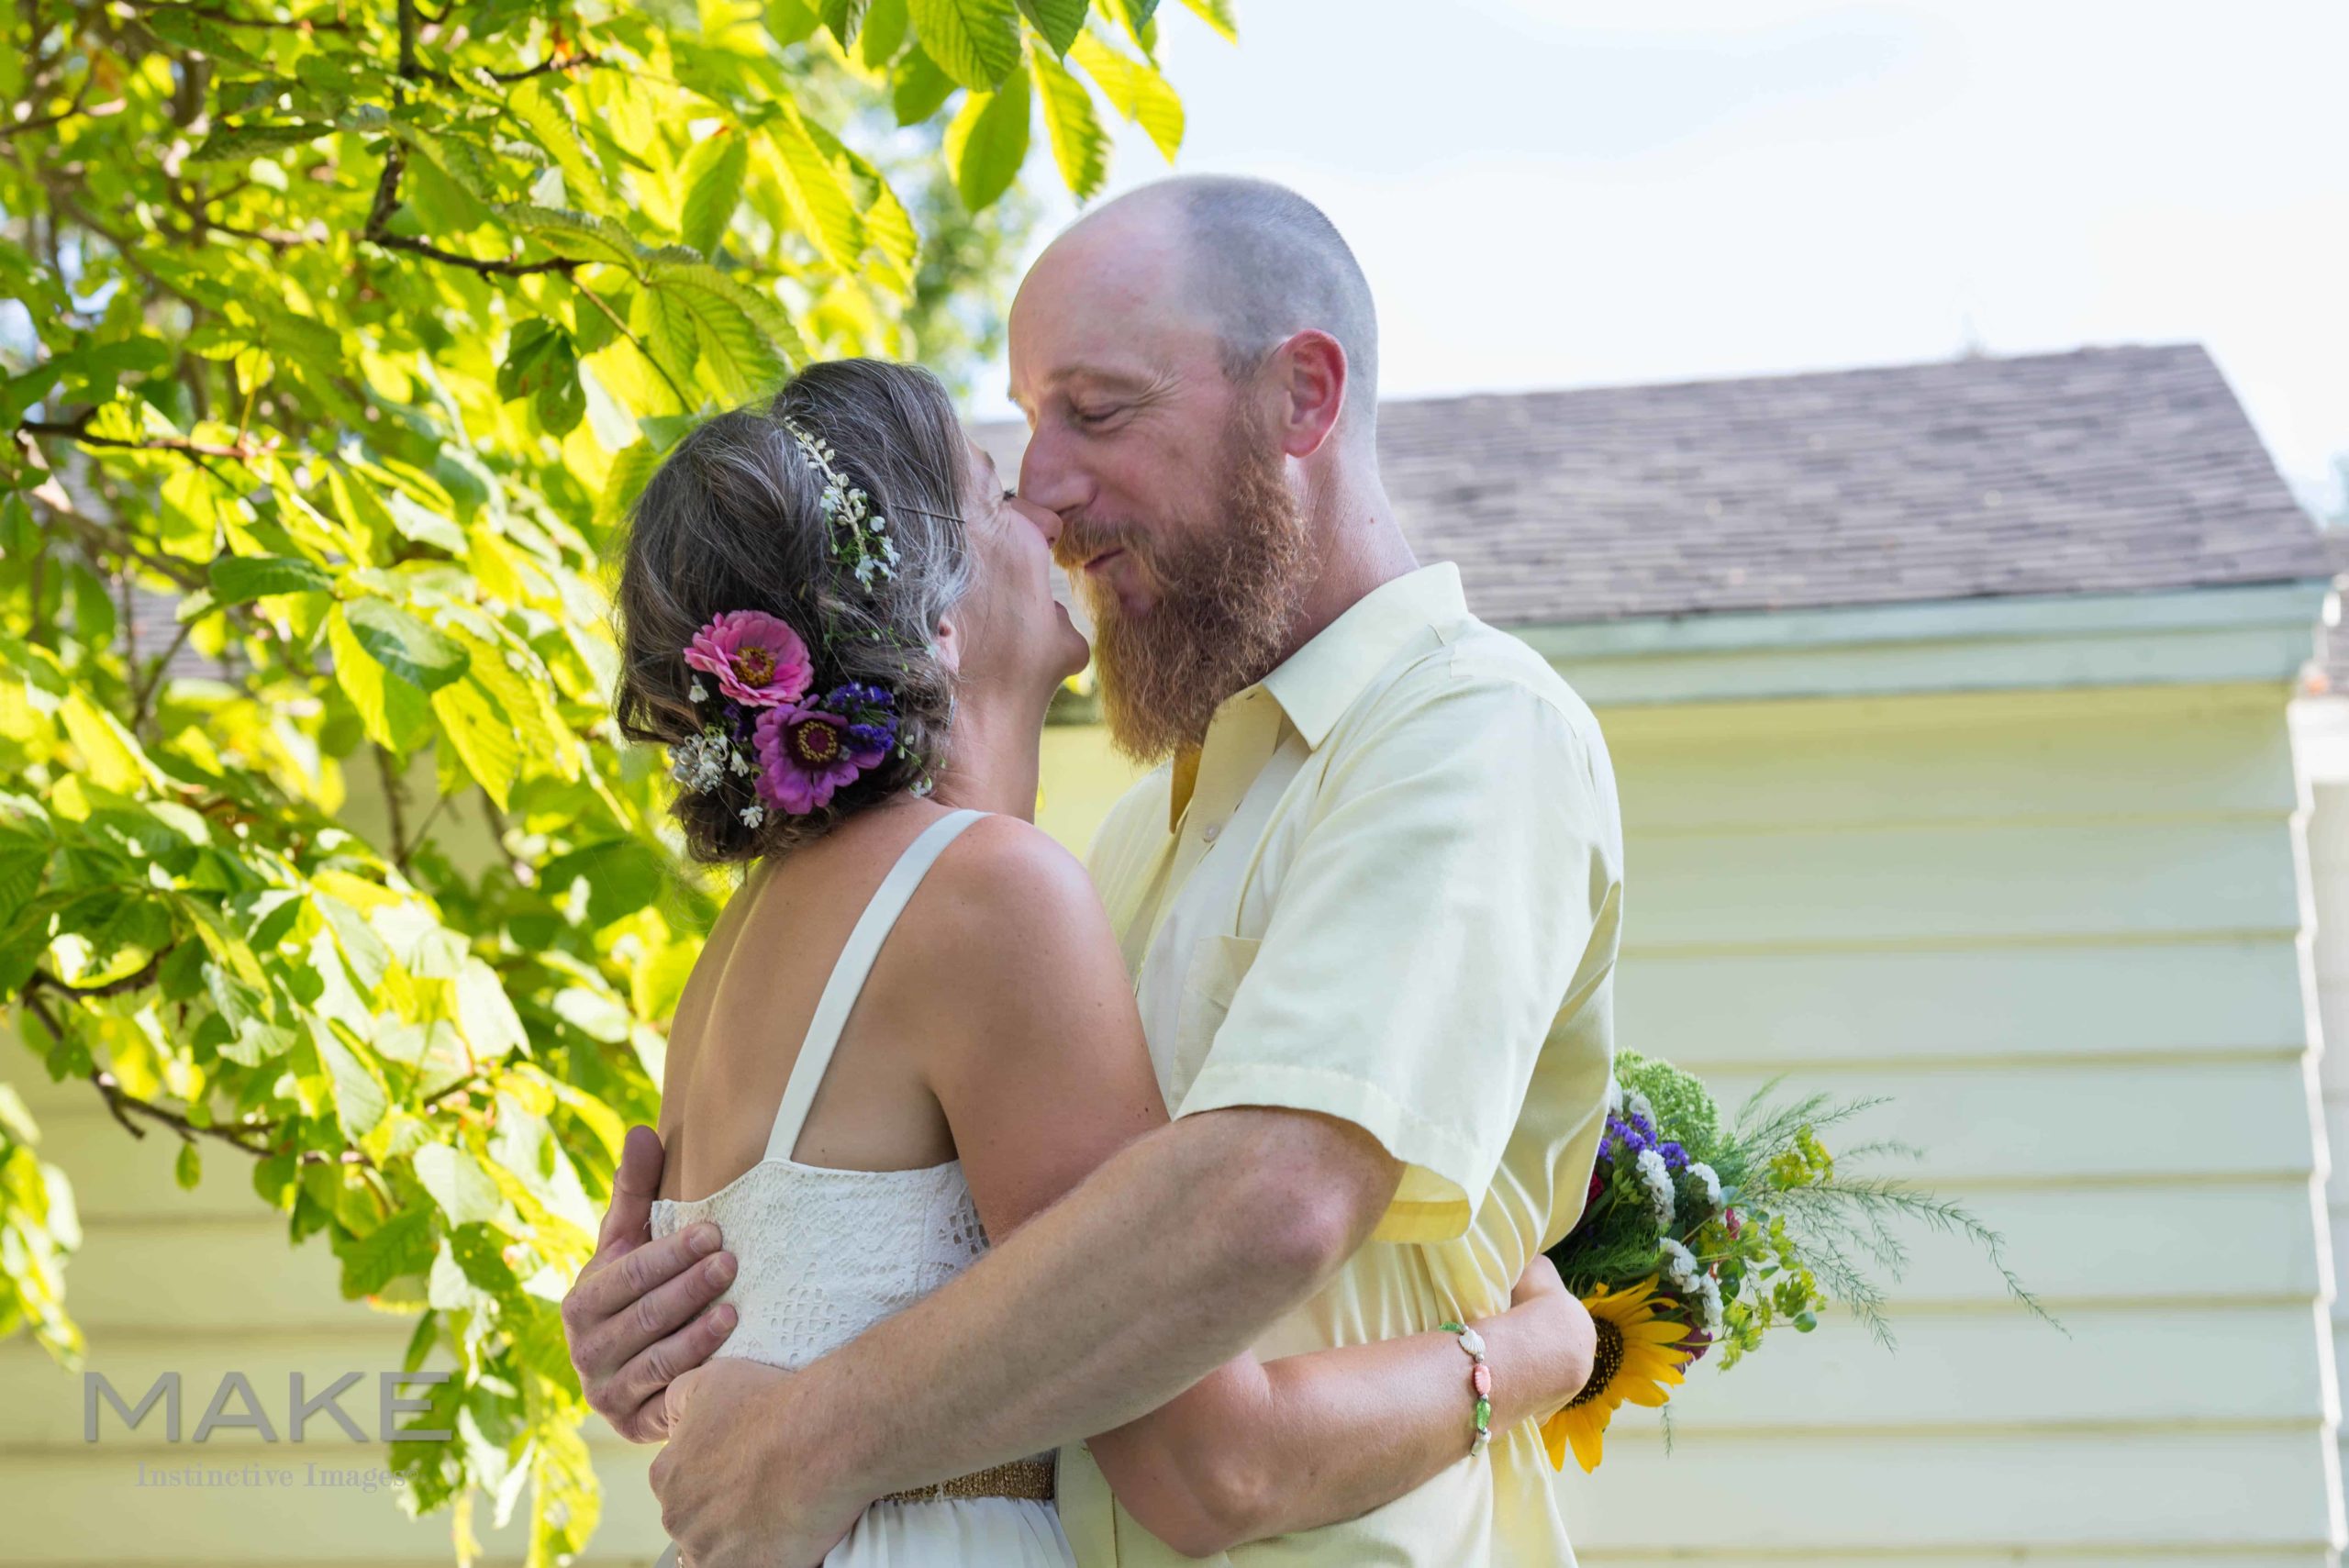 In this backyard minimony wedding type, the couple stands nose to nose for a portrait, hugging and smiling.